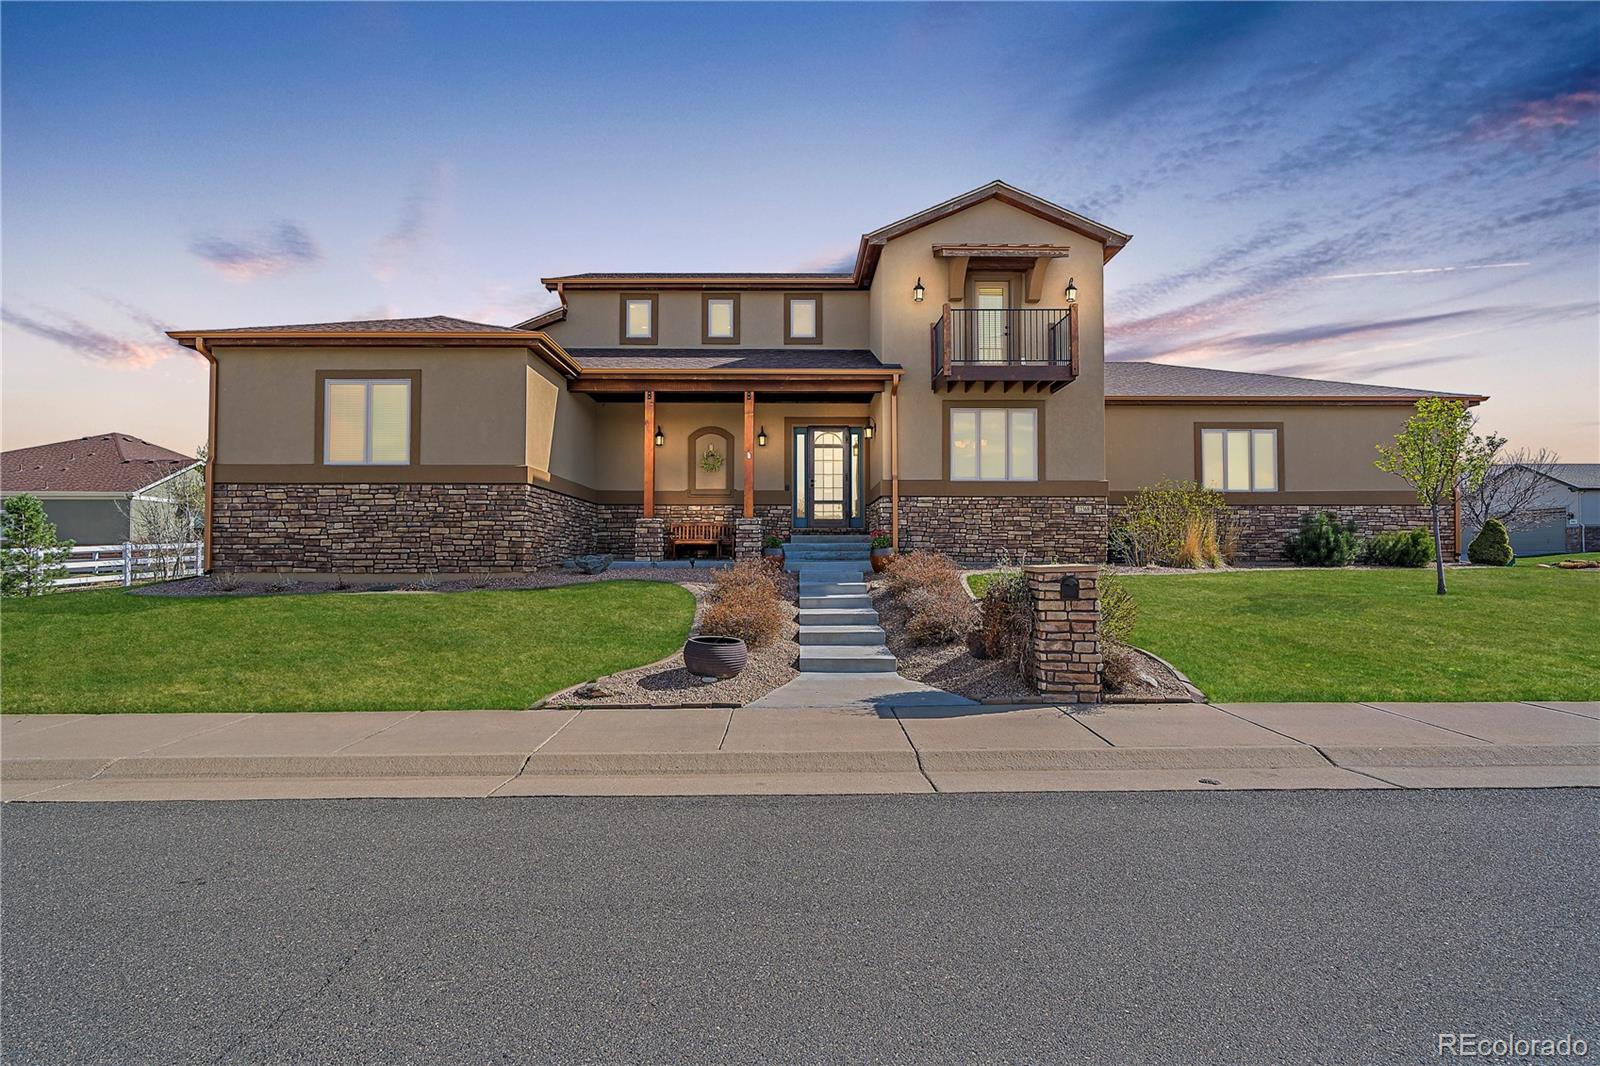 12368 81st, Arvada, CO